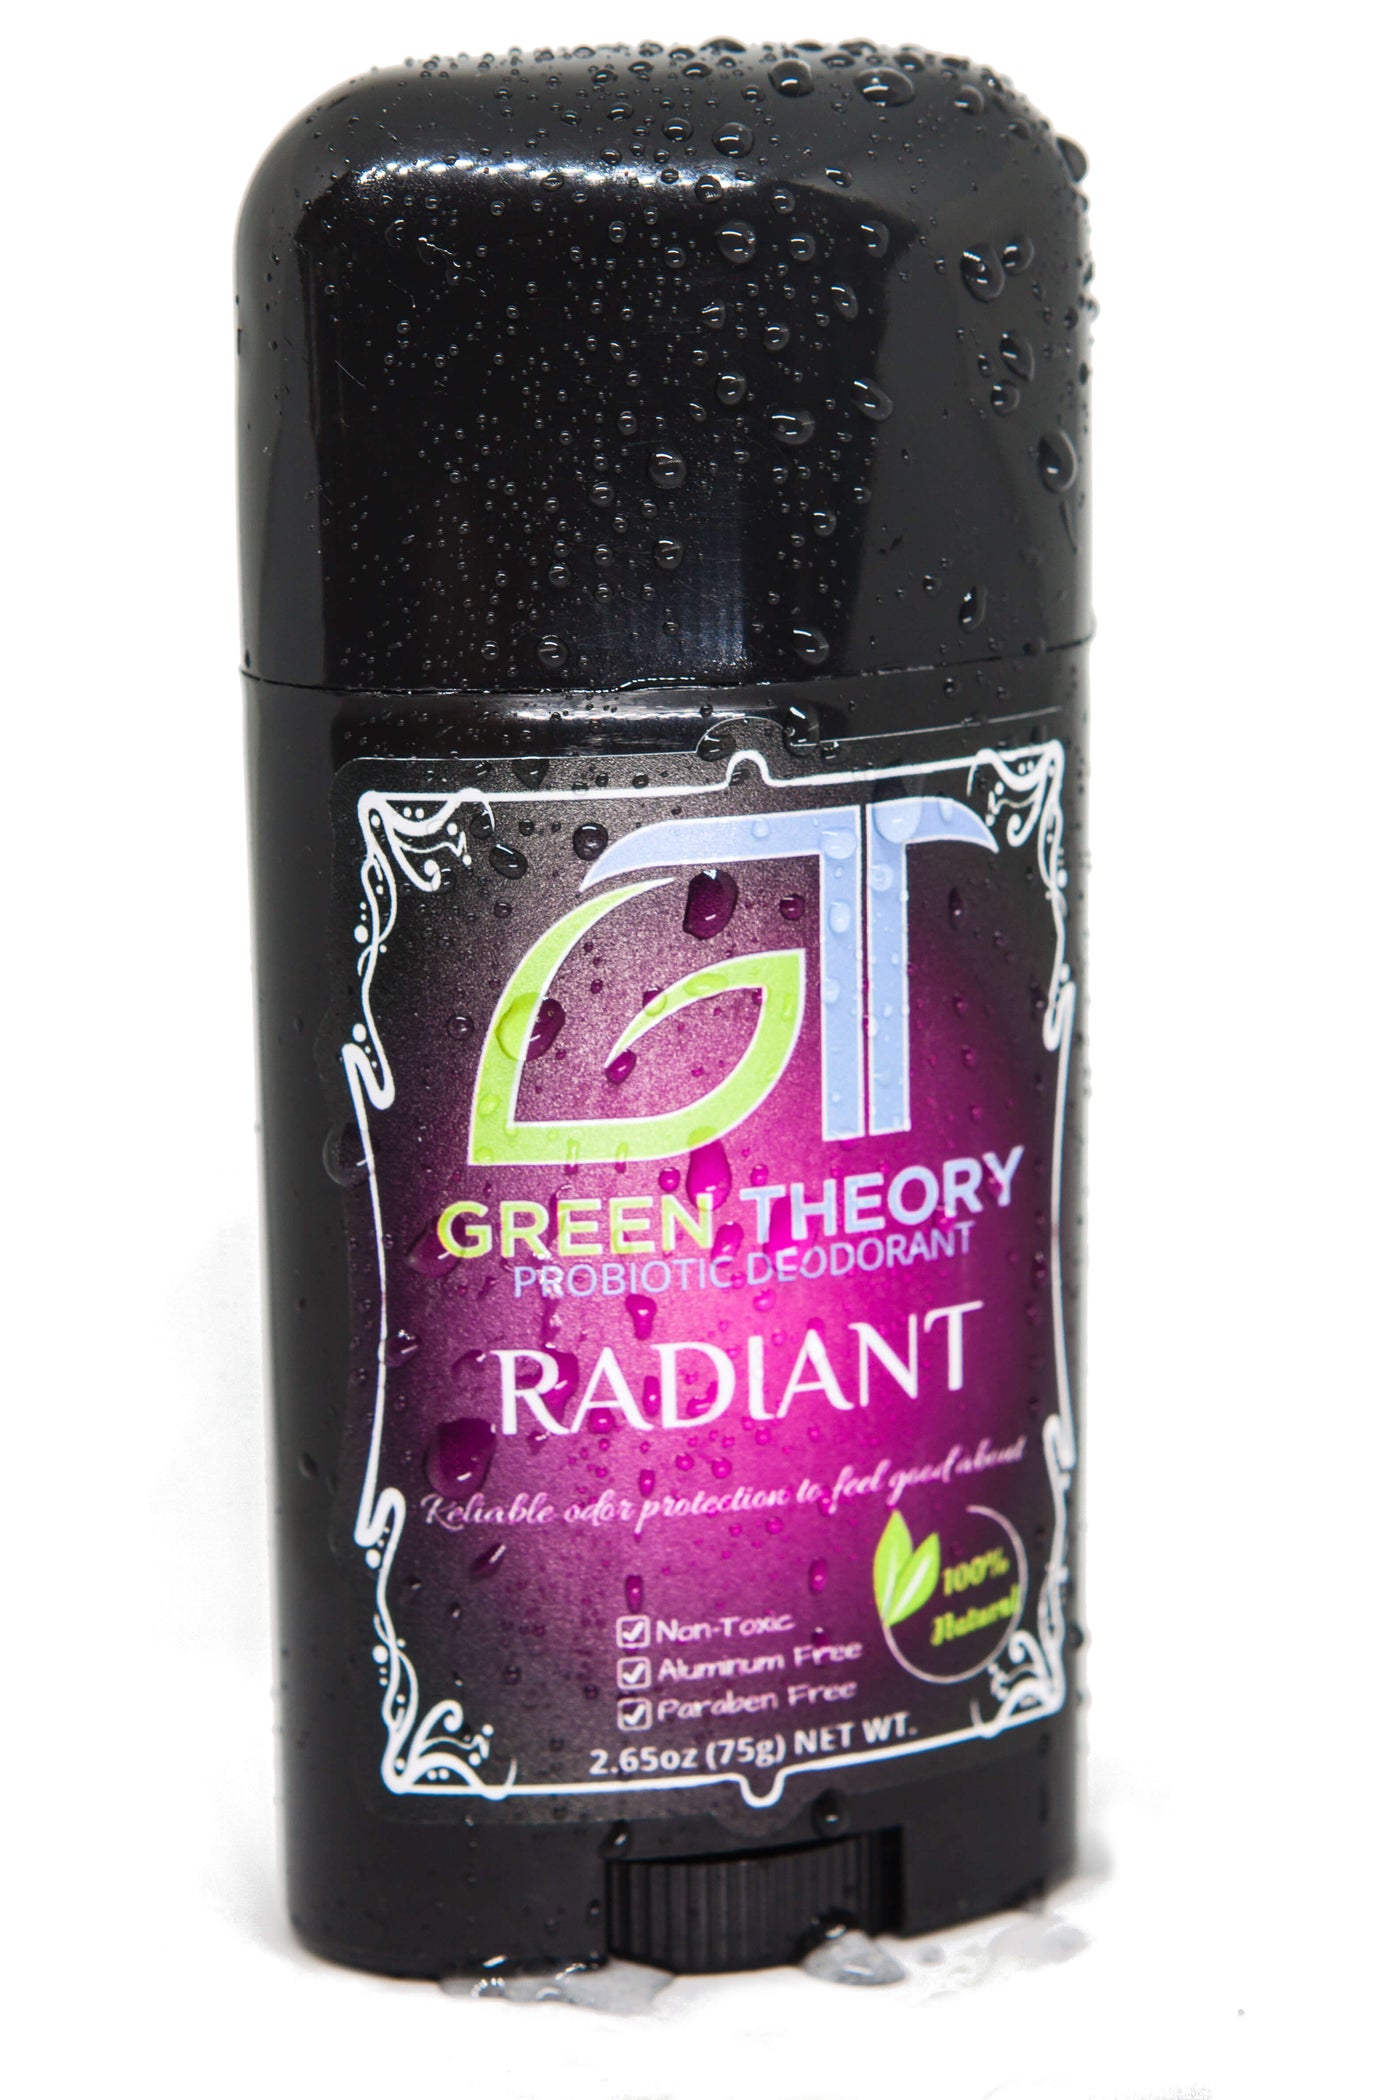 green theory radiant probiotic natural deodorant for women with an angular view of the front label. Stick is covered in water droplets and is standing against a white background